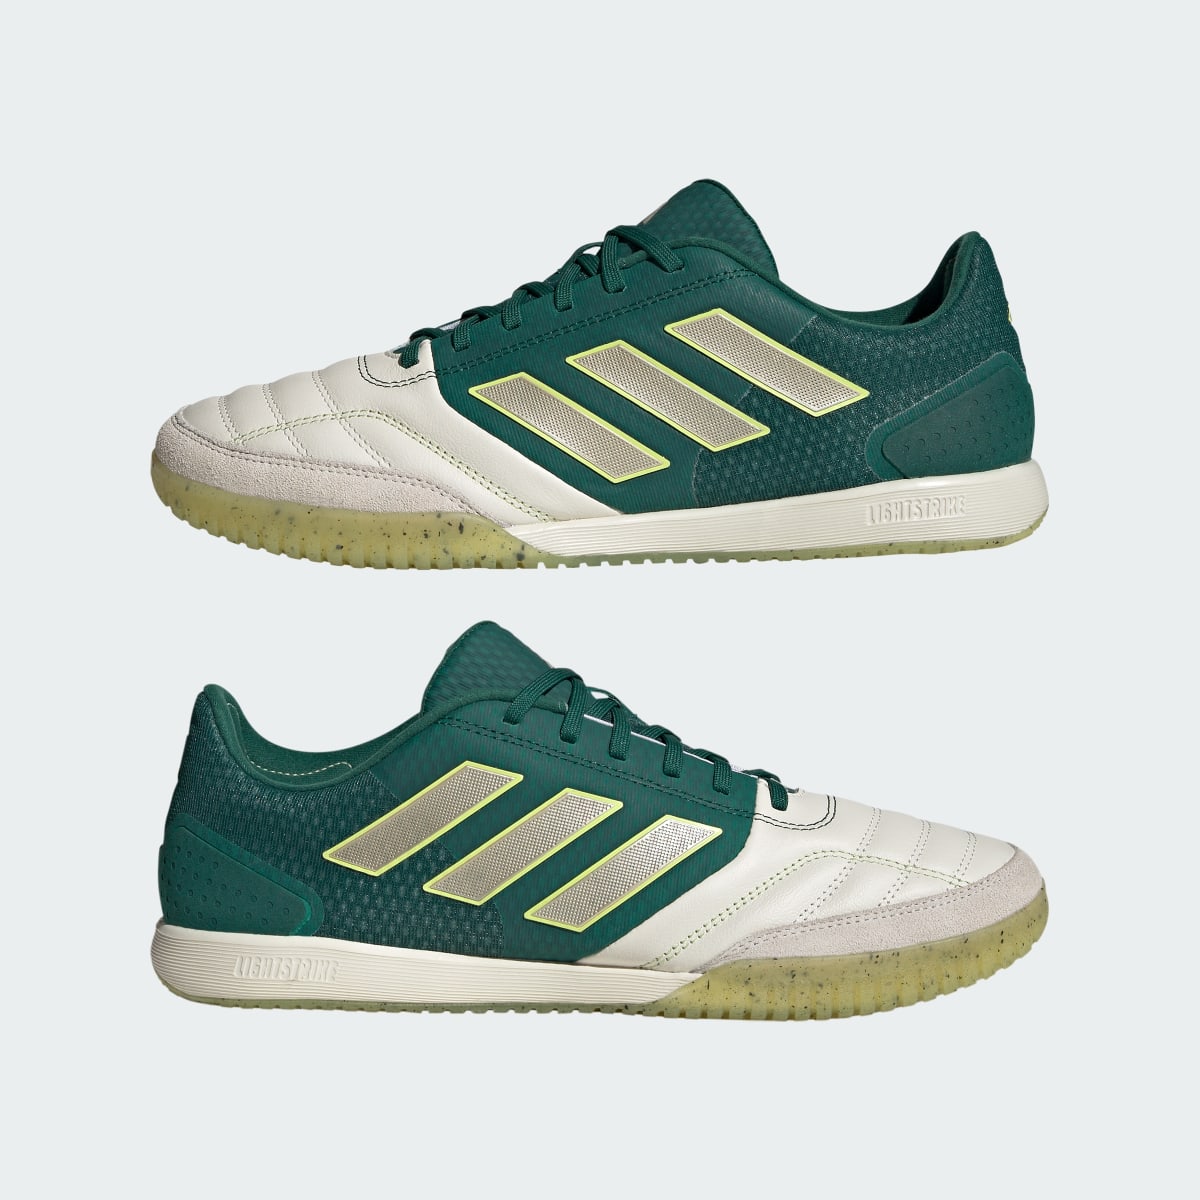 Adidas Top Sala Competition Indoor Boots. 8